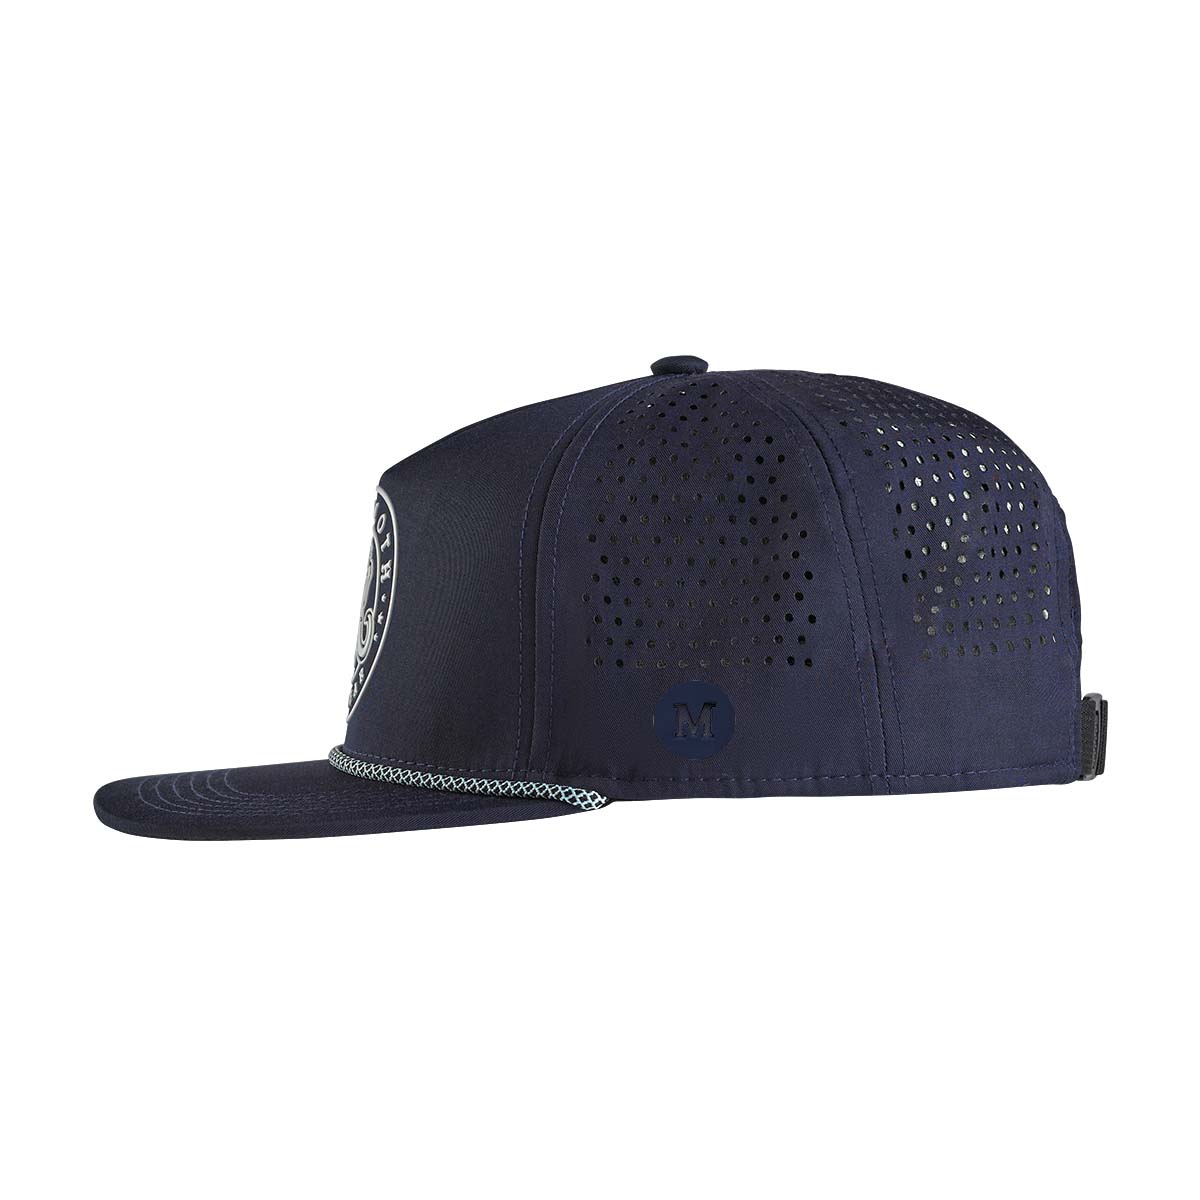 SIDE CLASSIC ROPE HAT - NAVY